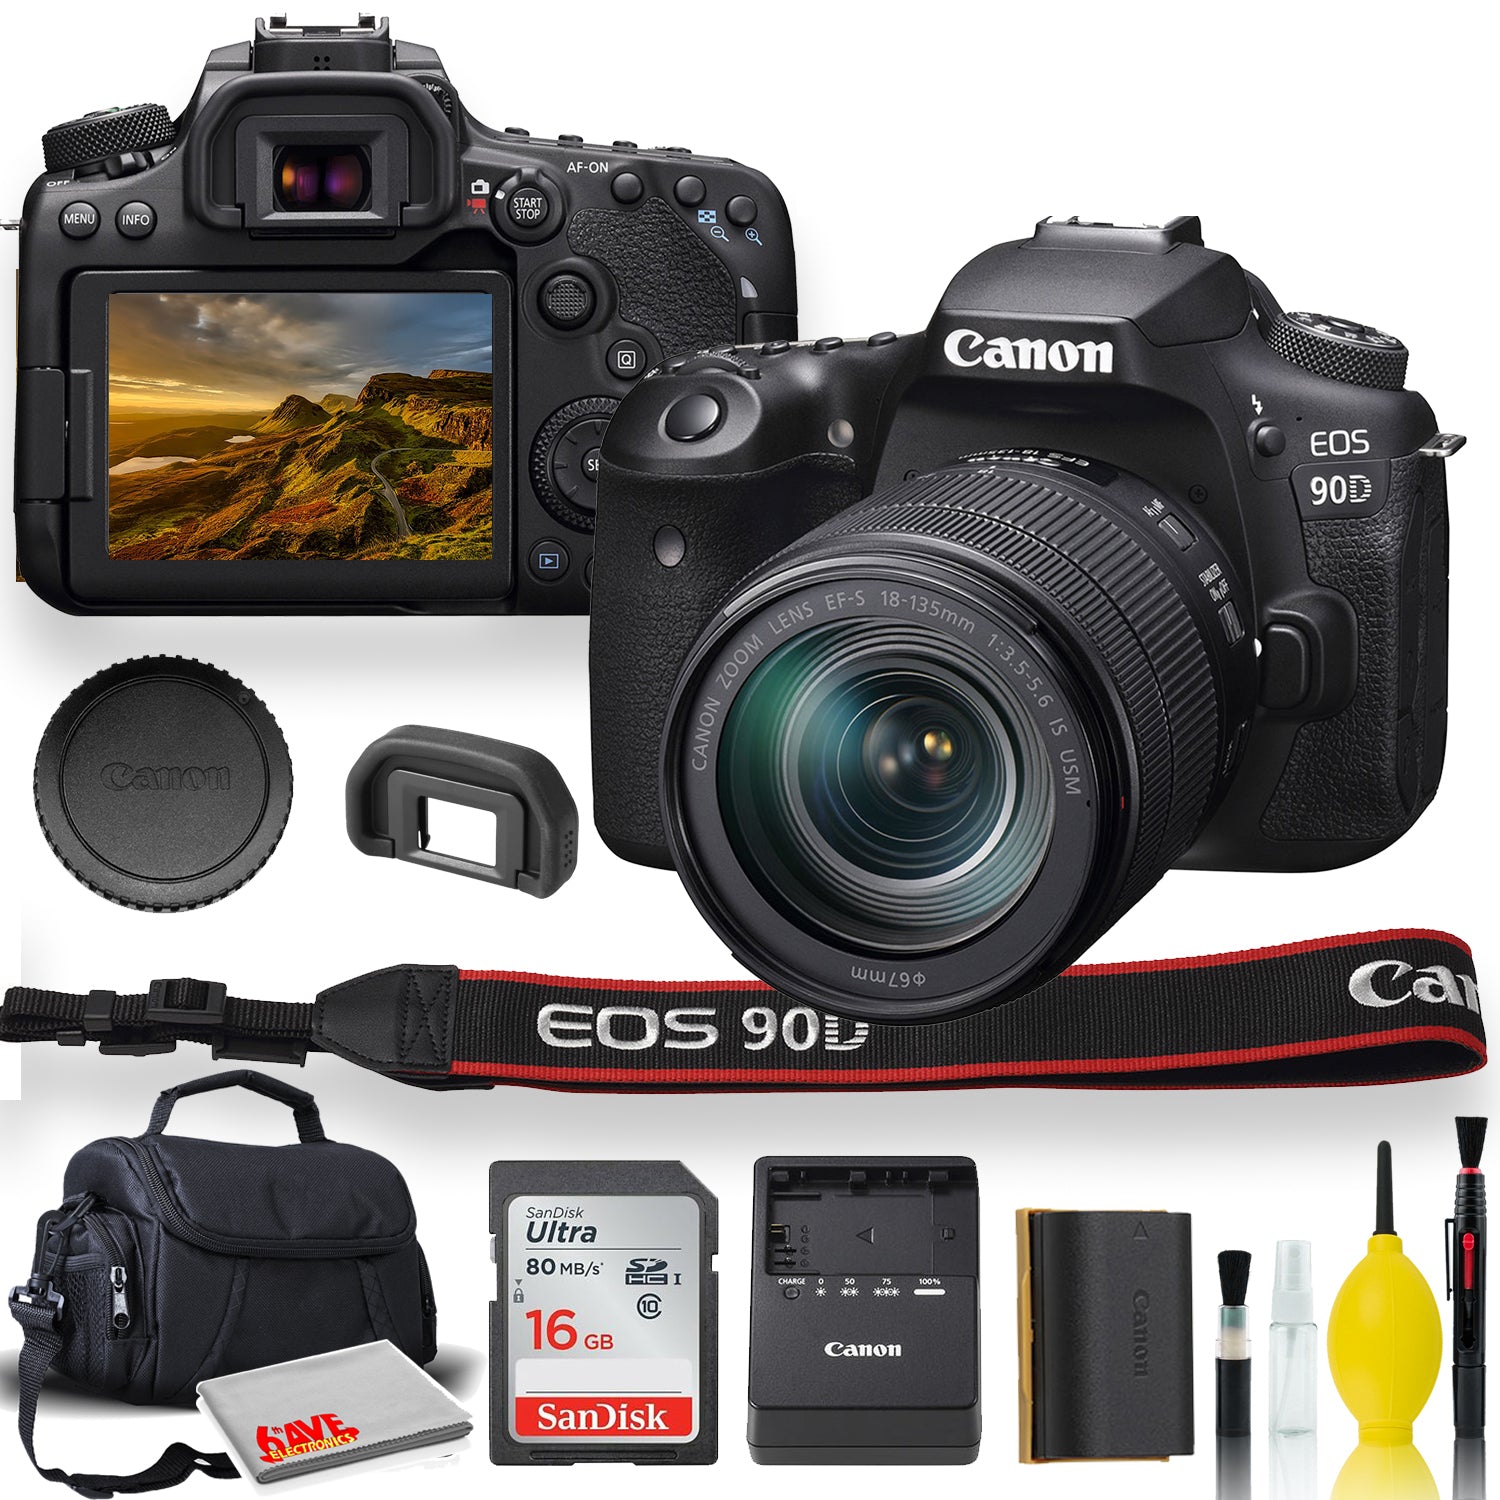 Canon EOS 90D DSLR Camera with 18-135mm Lens With Padded Case, Memory Card, and More - Starter Bundle Set